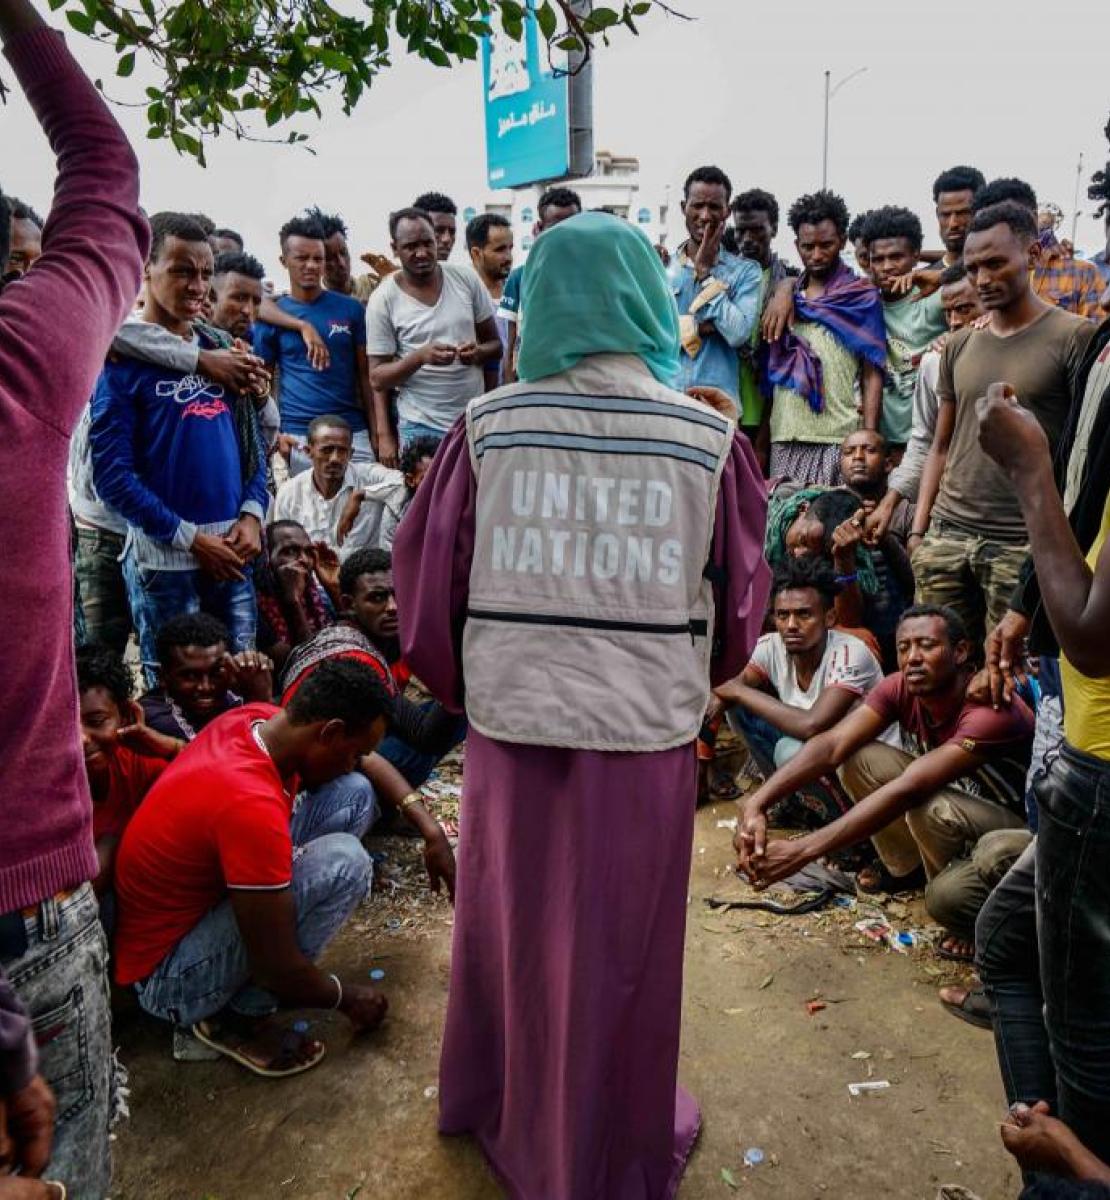 A woman in a United Nations vest is surrounded by many people waiting to receive humanitarian assistance.